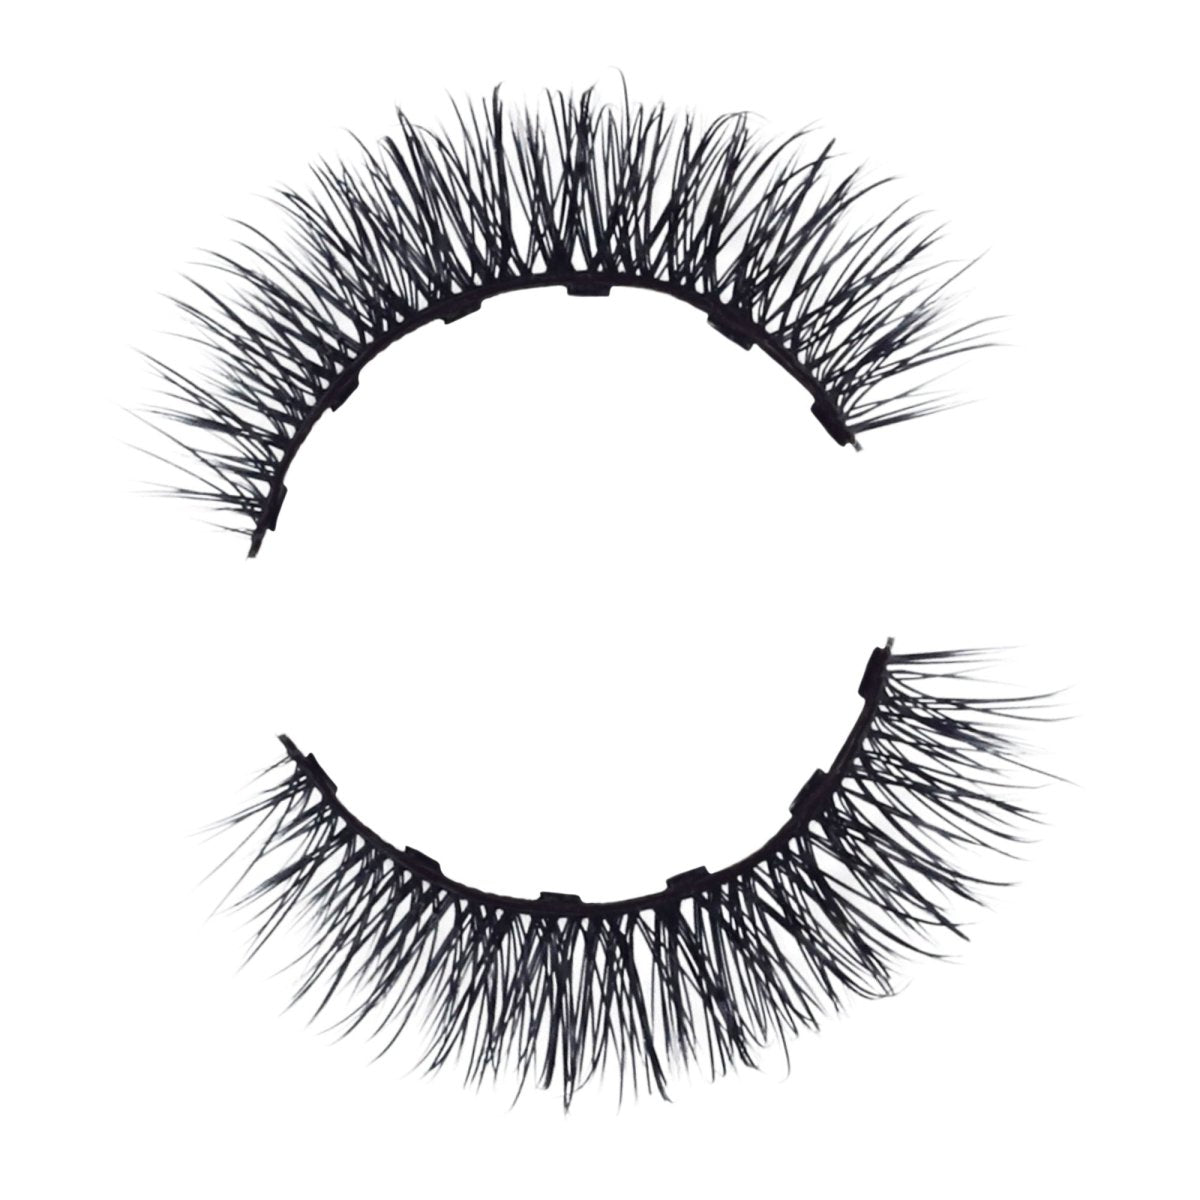 Queen Me Russian Hybrid Magnetic Lash & Liner Set - Lola's Lashes